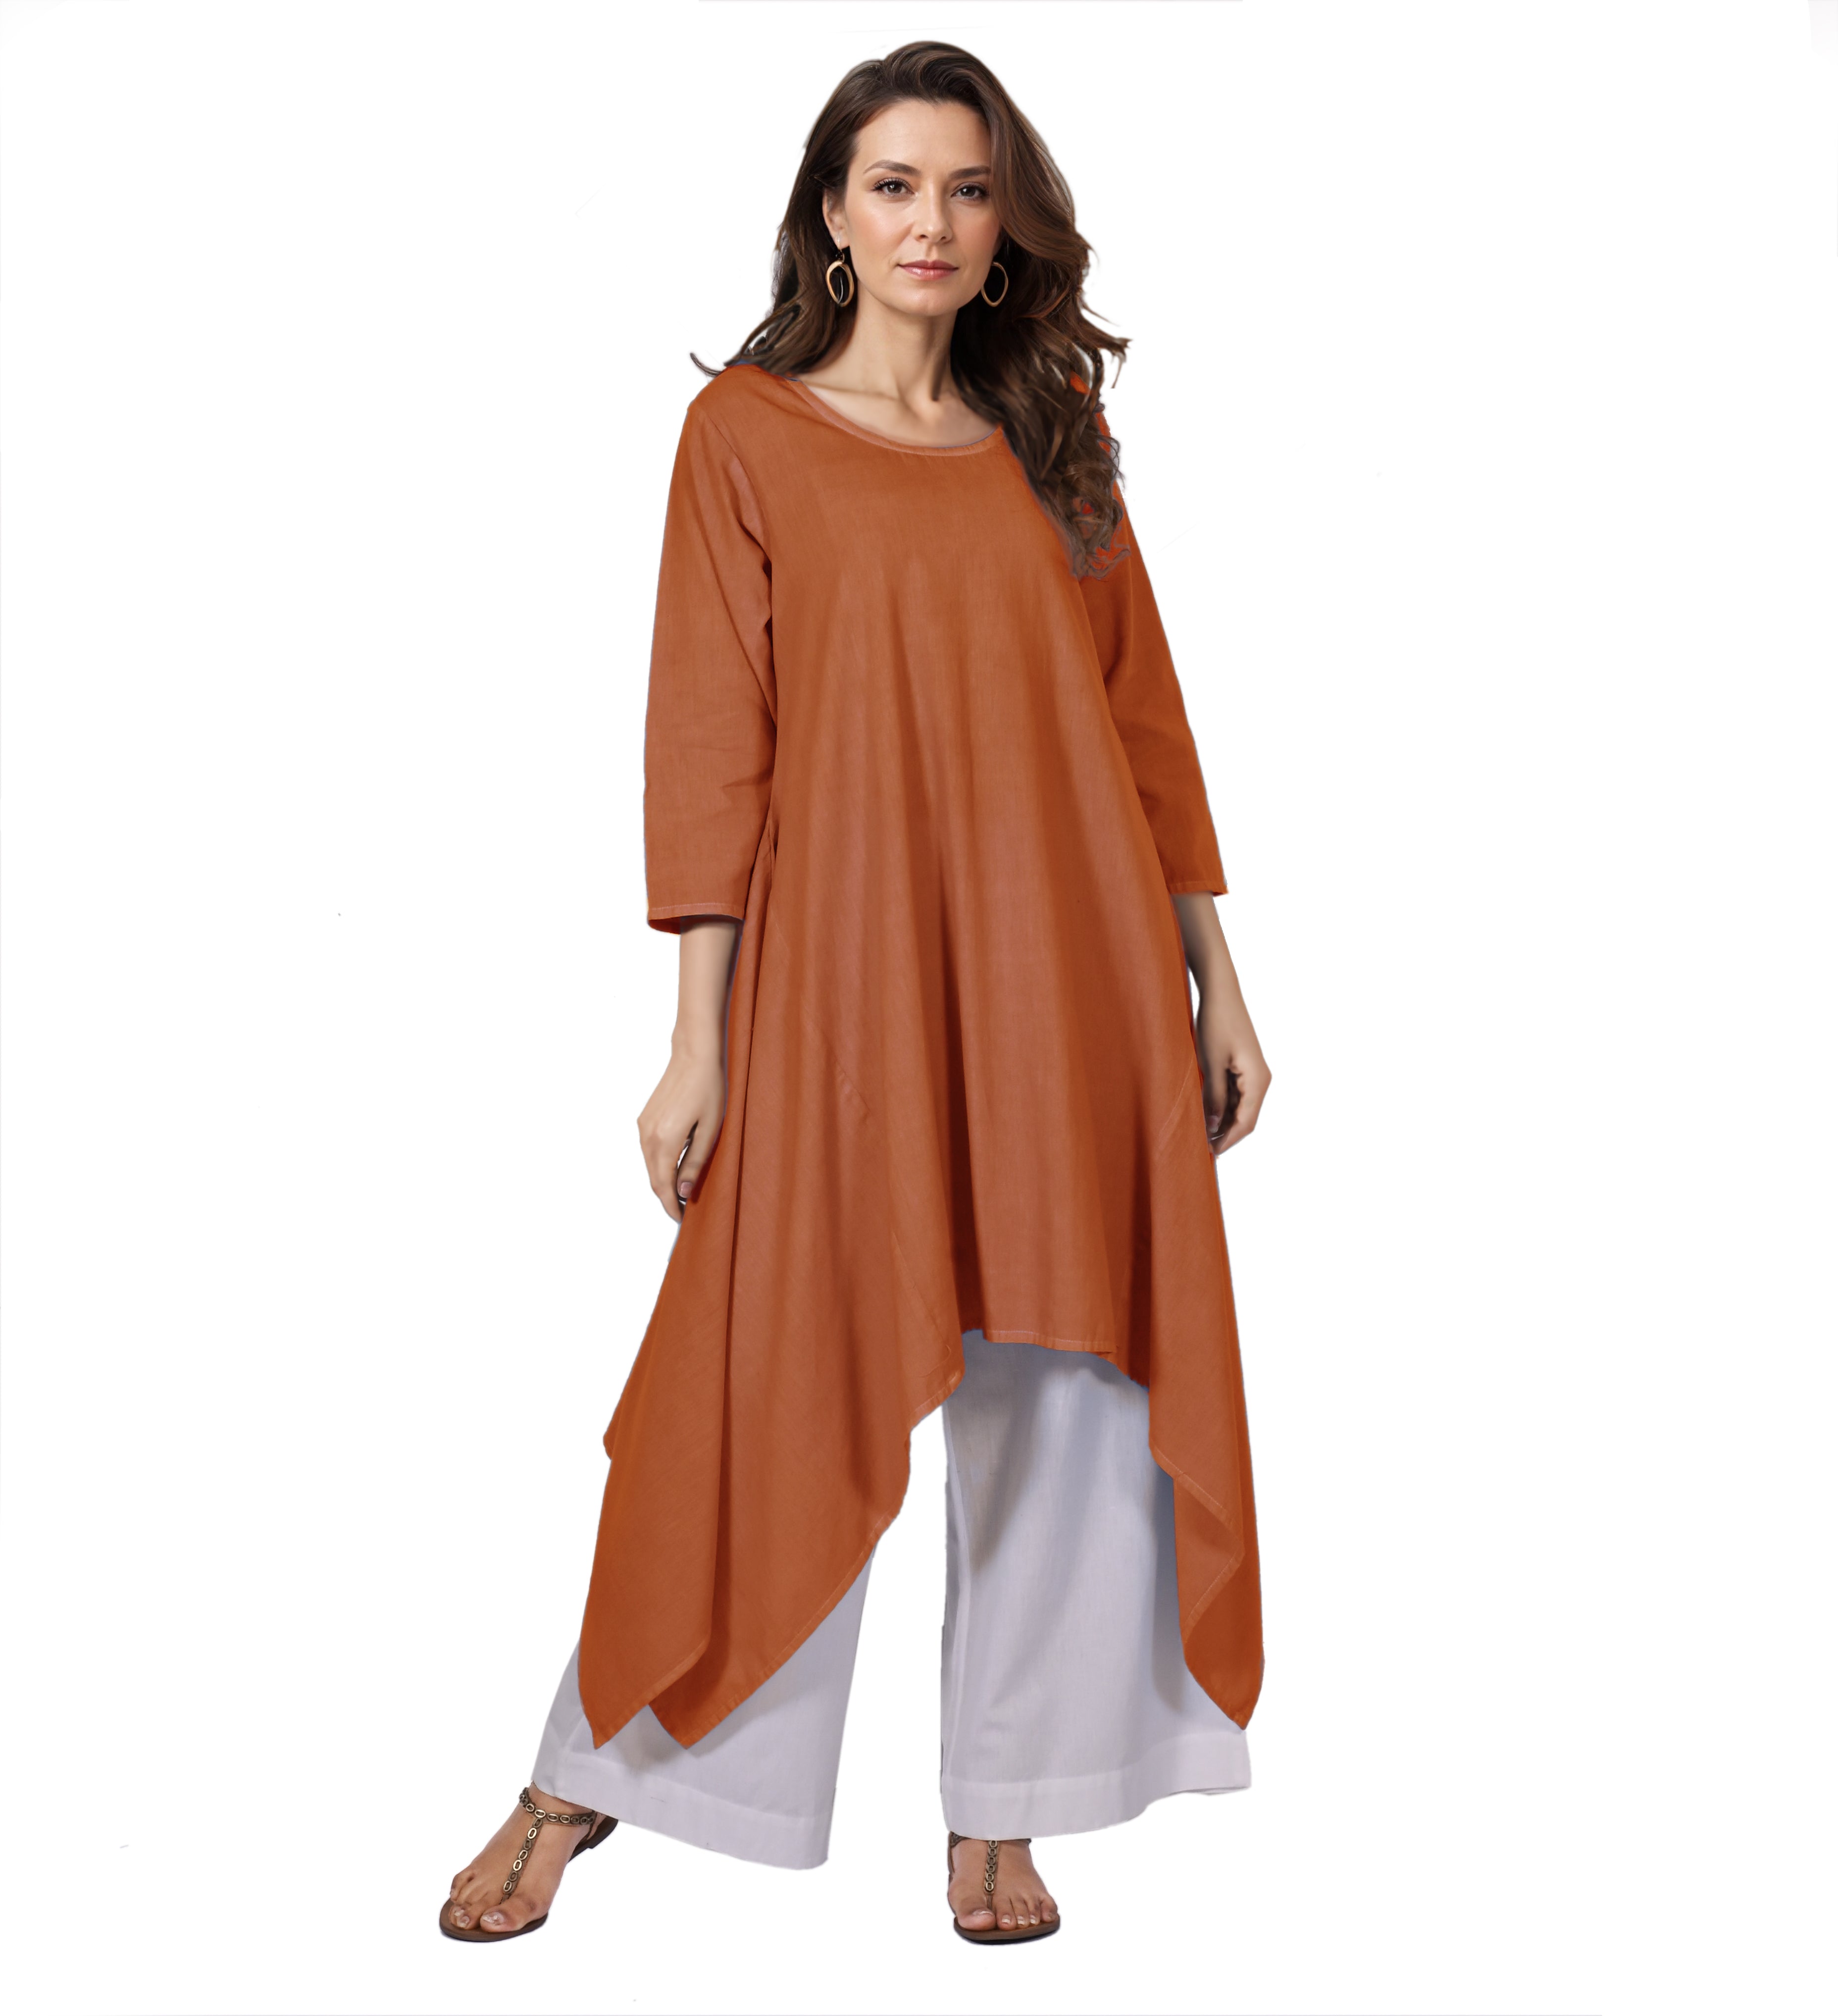 Large Ladies 3/4 Sleeve High Low Kurti at Rs 550 in Surat | ID: 19280962162